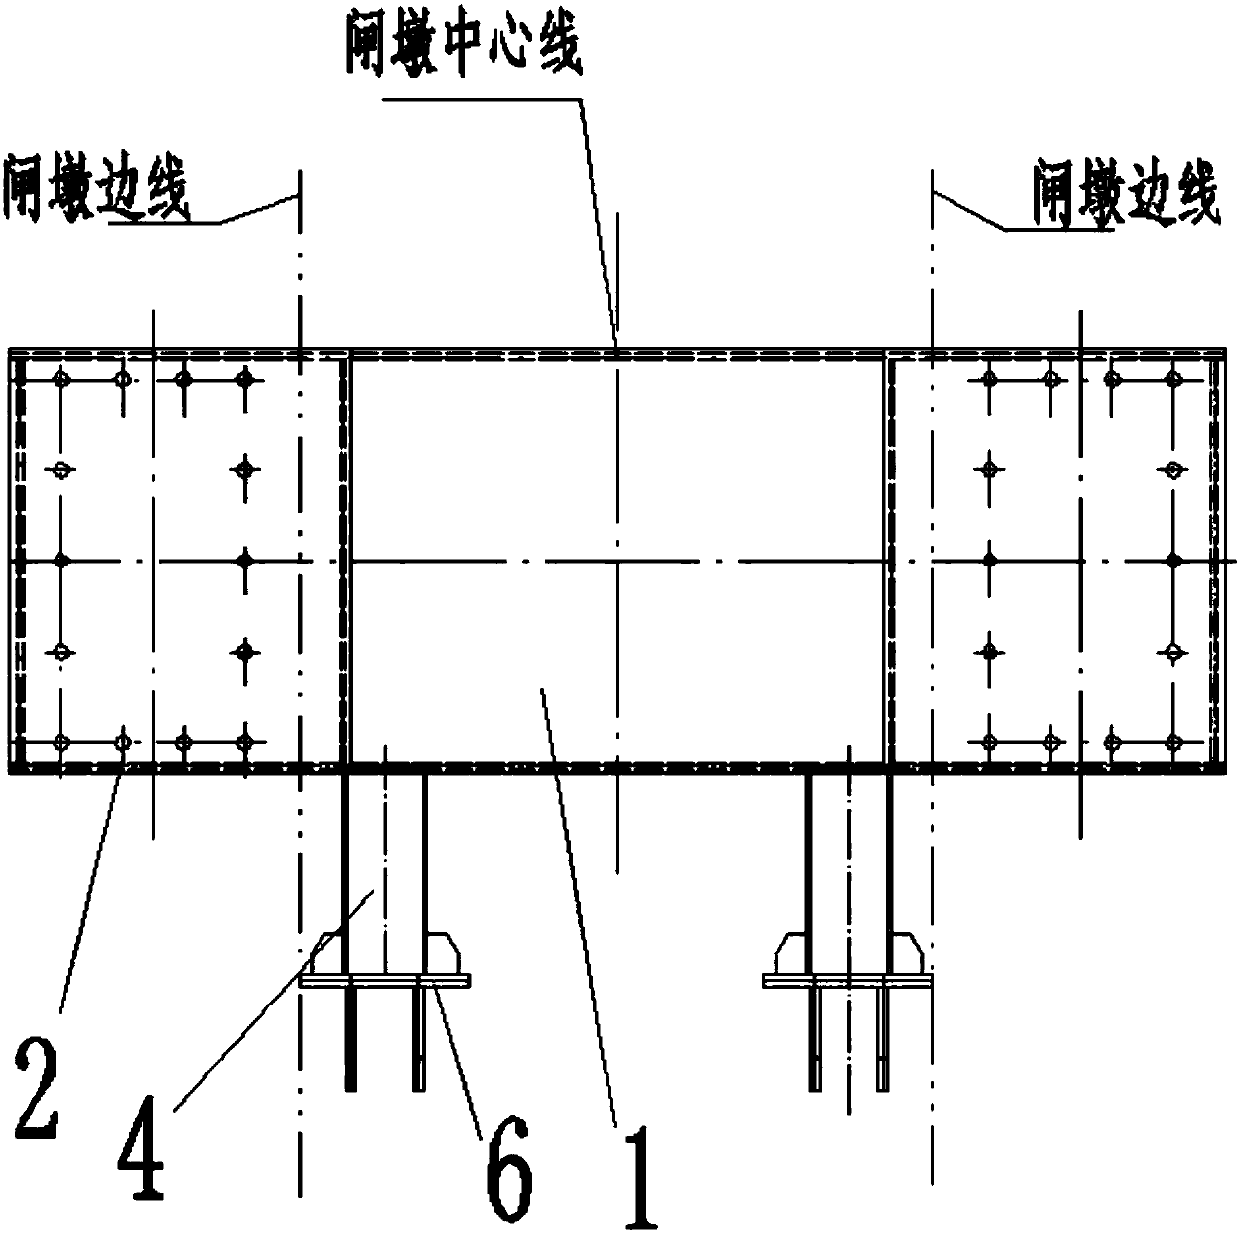 Assembly type structure with concrete-filled-steel-tubular radial gate support and pier